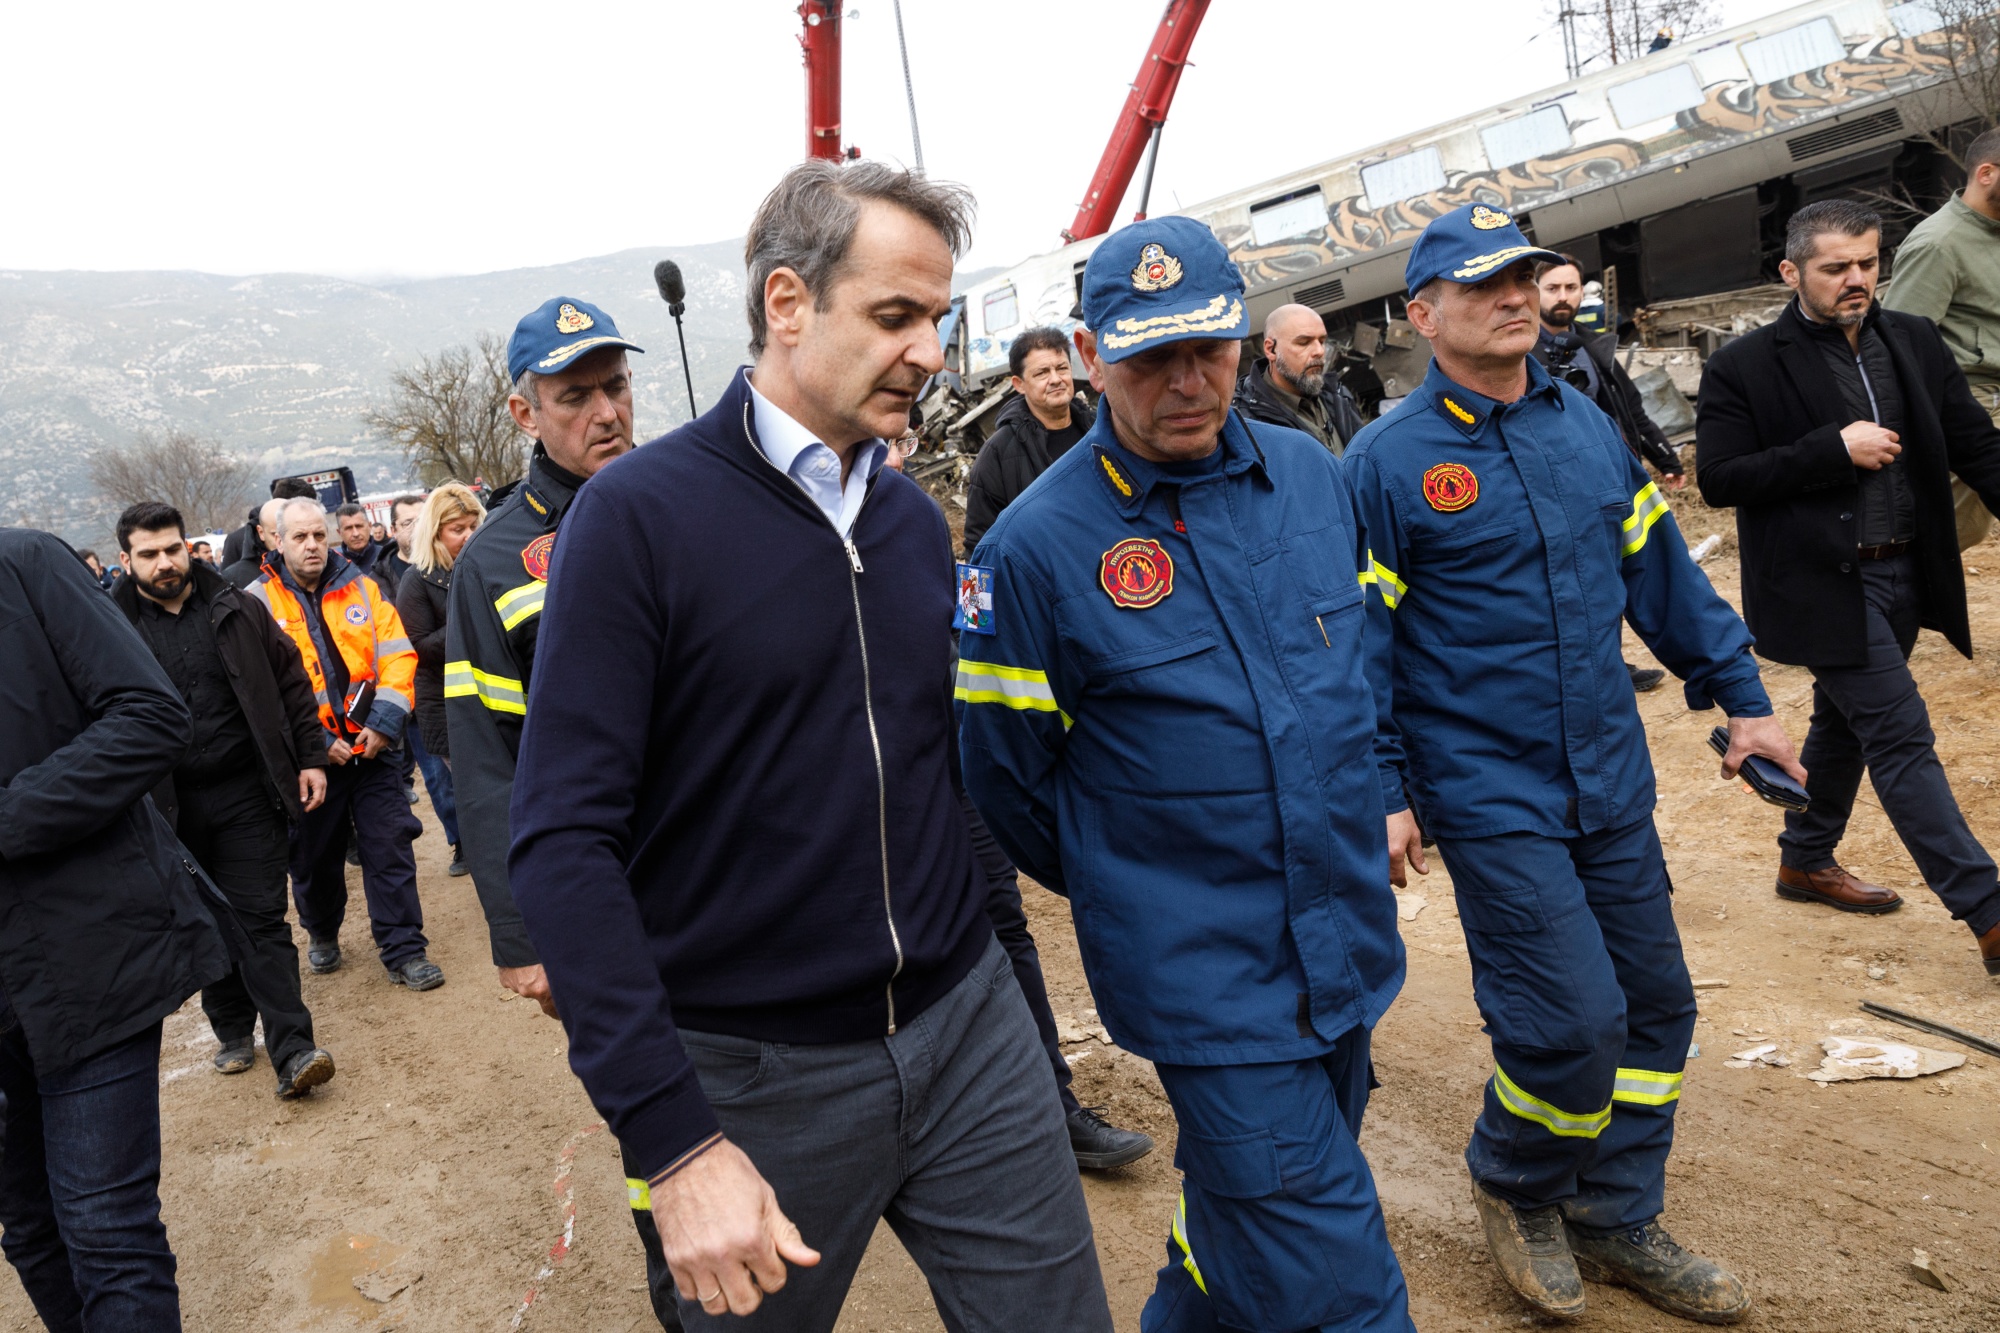 Kyriakos Mitsotakis at the site of the&nbsp;train crash in the Tempe valley near Larissa, Greece, on March 1.